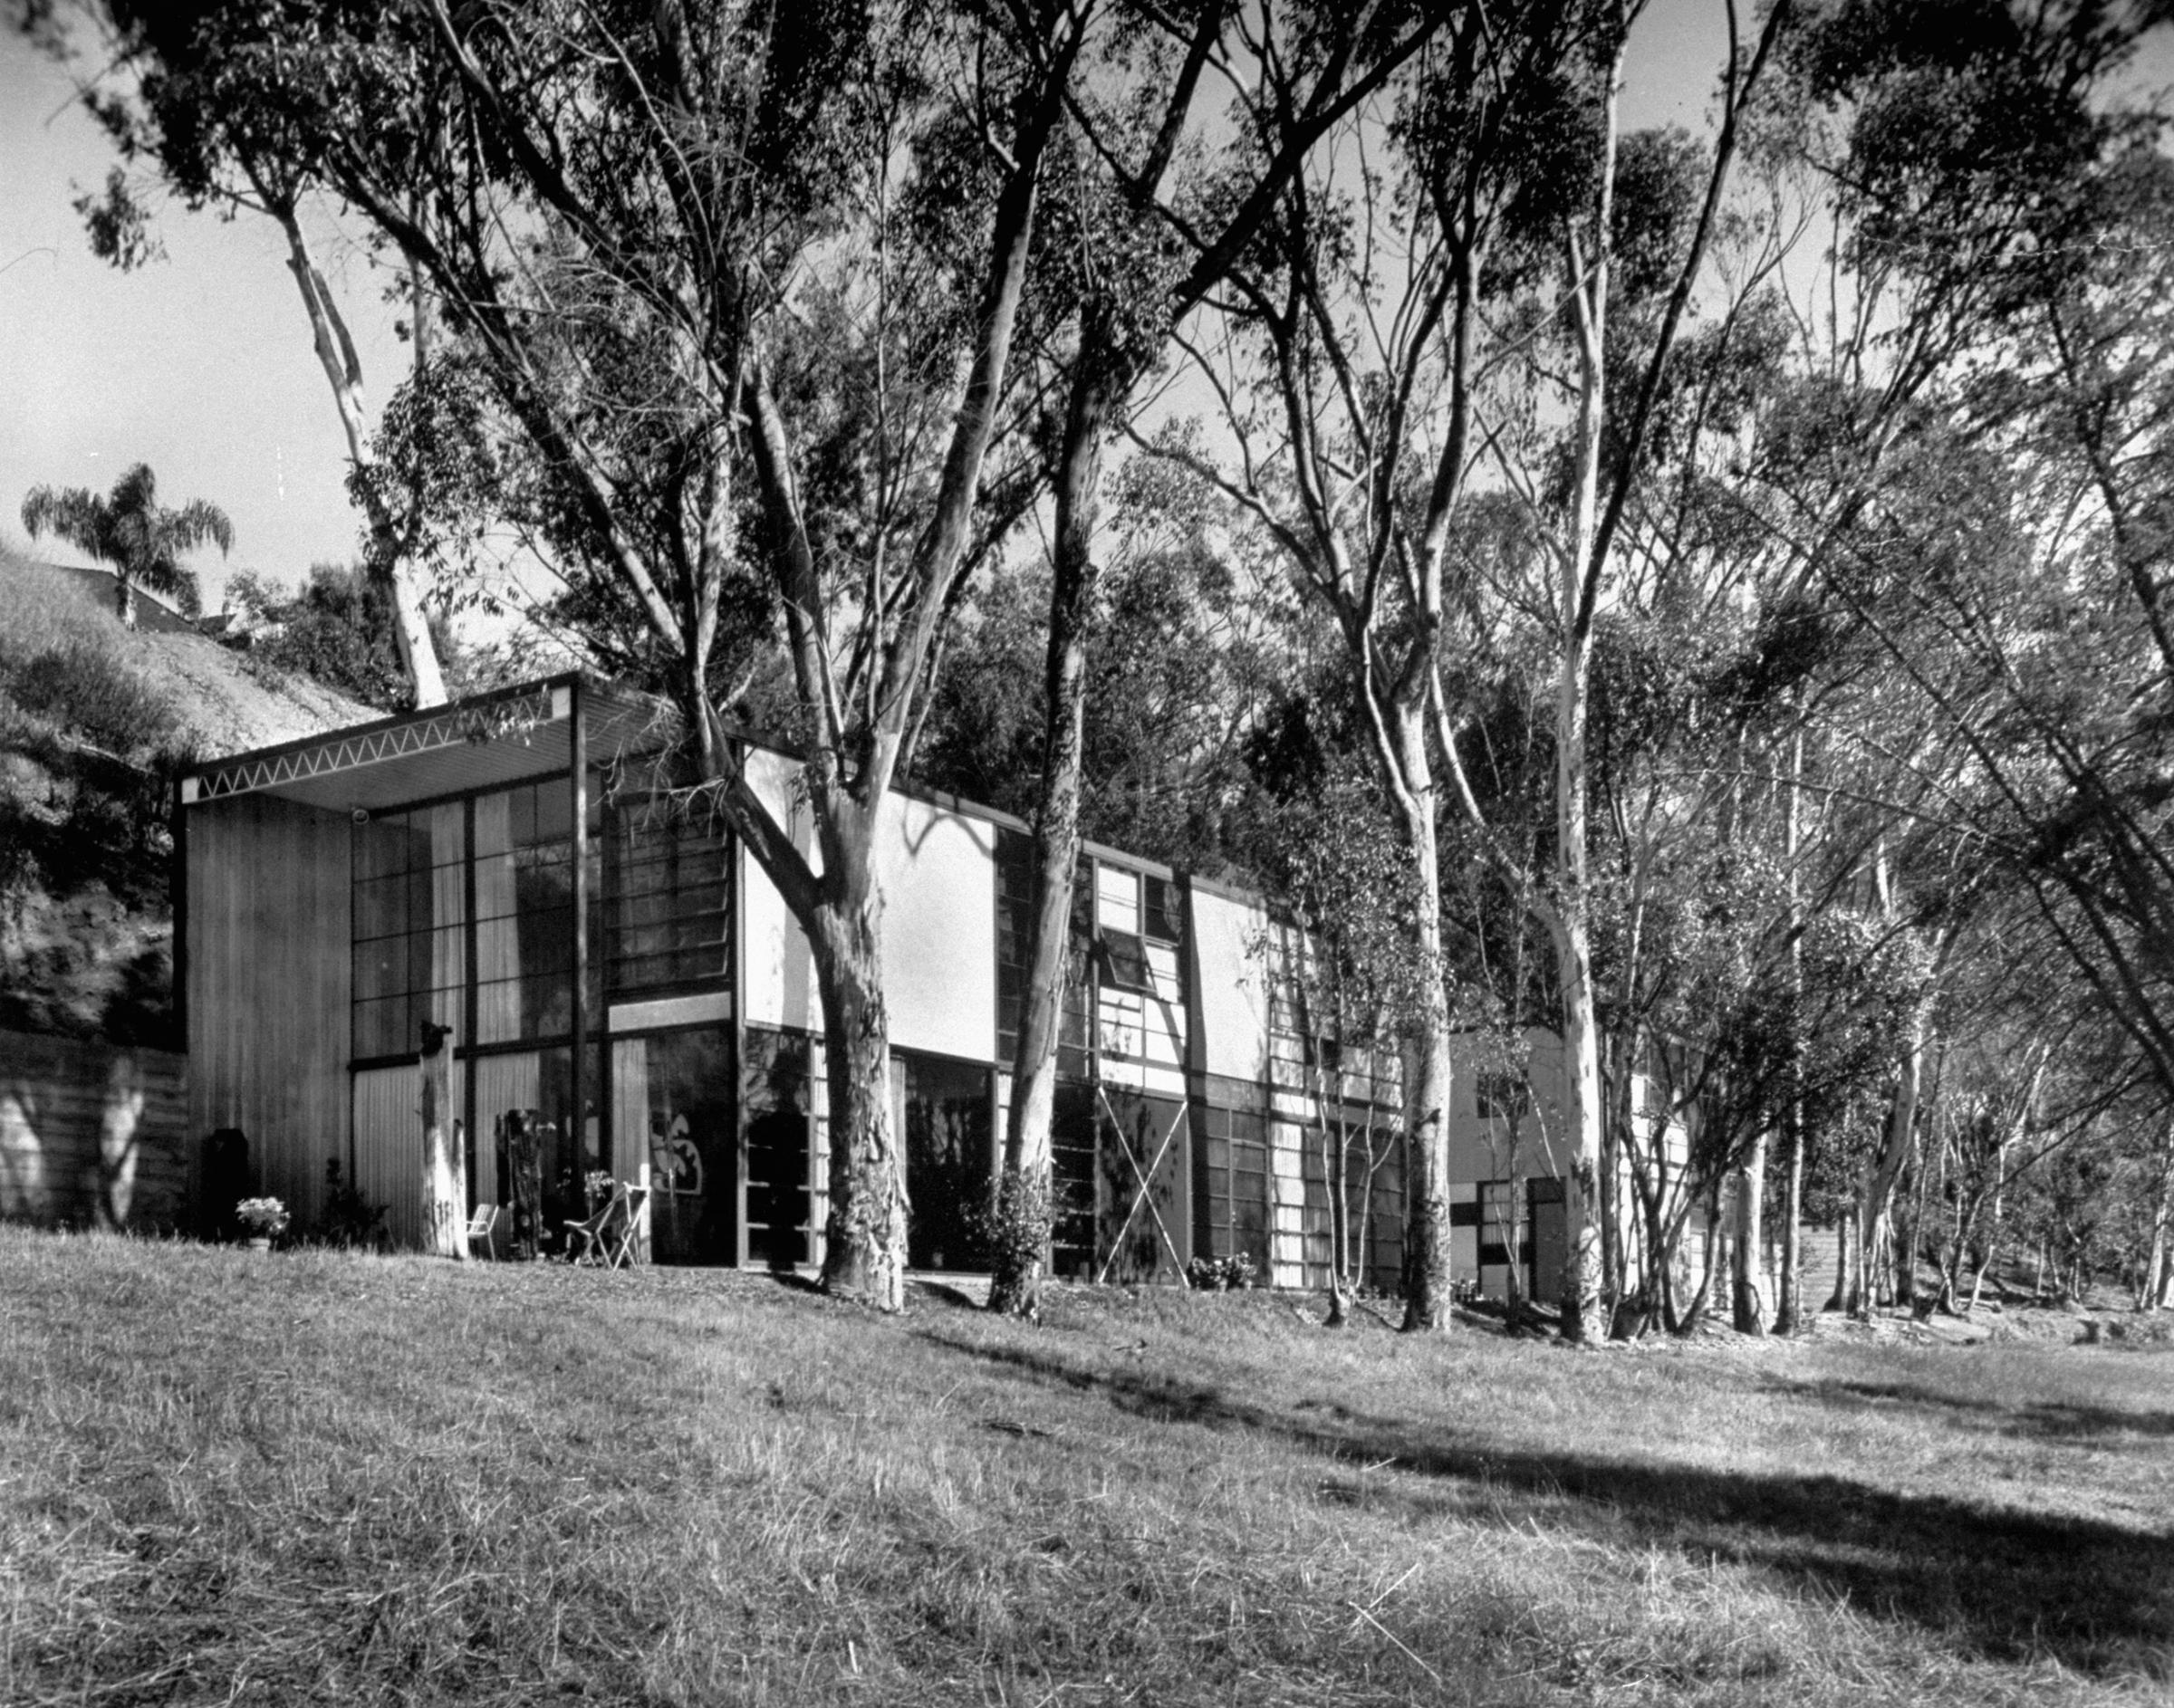 Exterior view of Eames' house shows how it nudges into a hillside, is fronted by eucalyptus trees. The studio-office is at right, joined to house by a patio.